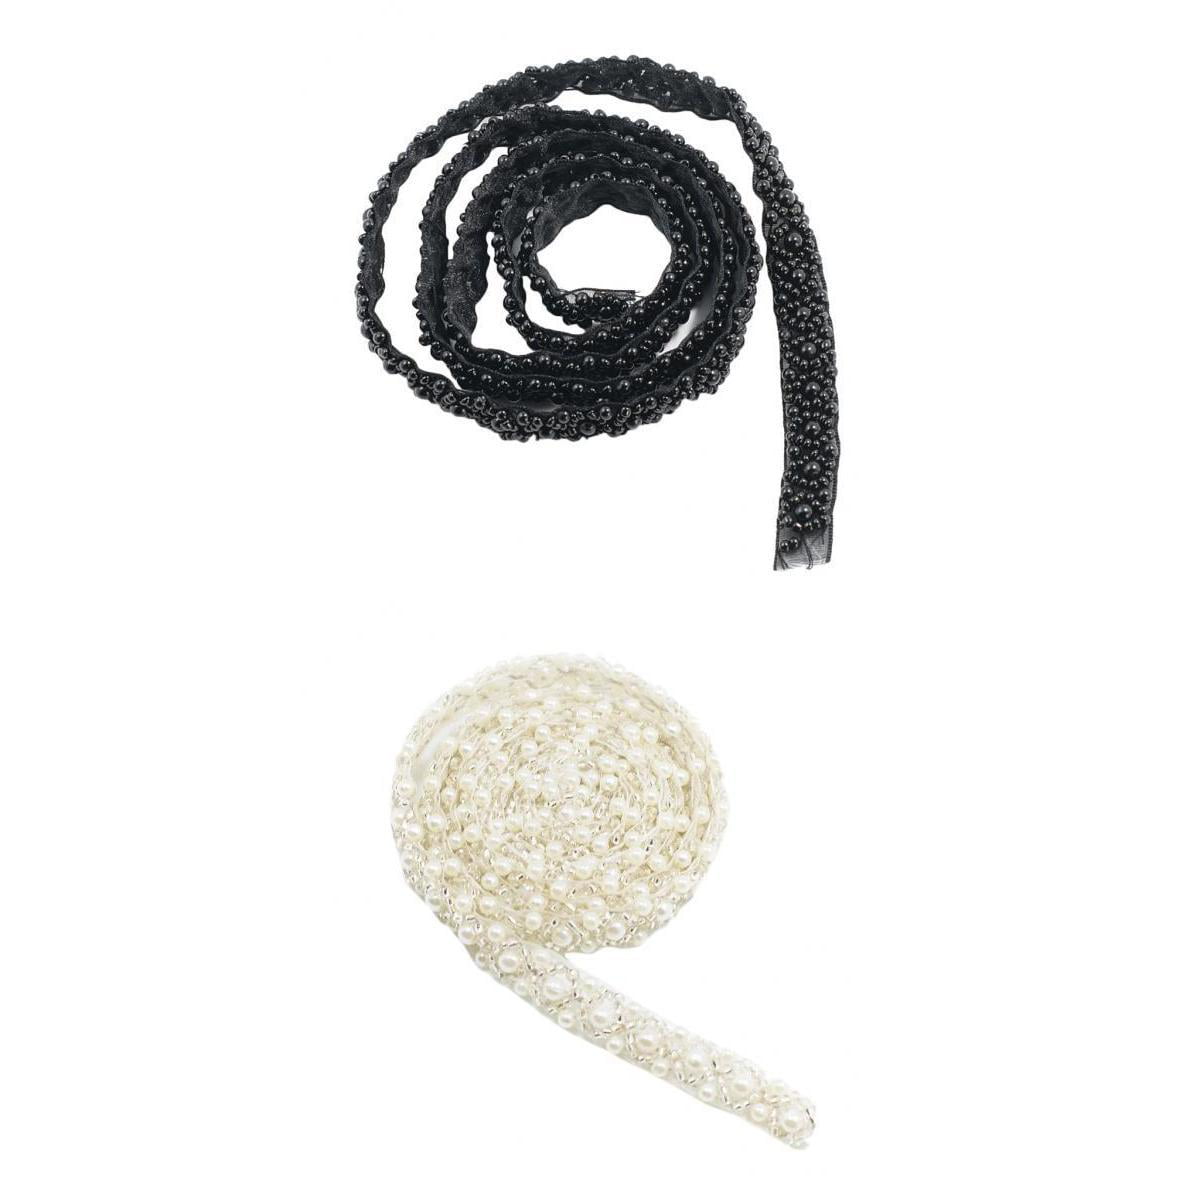 DIY Handmade Lace Fabrics for Sewing Supplies Crafts Black 2Pcs Prettyia Embroidery Flower Neck Lace Fabric Collar Tassel Applique 